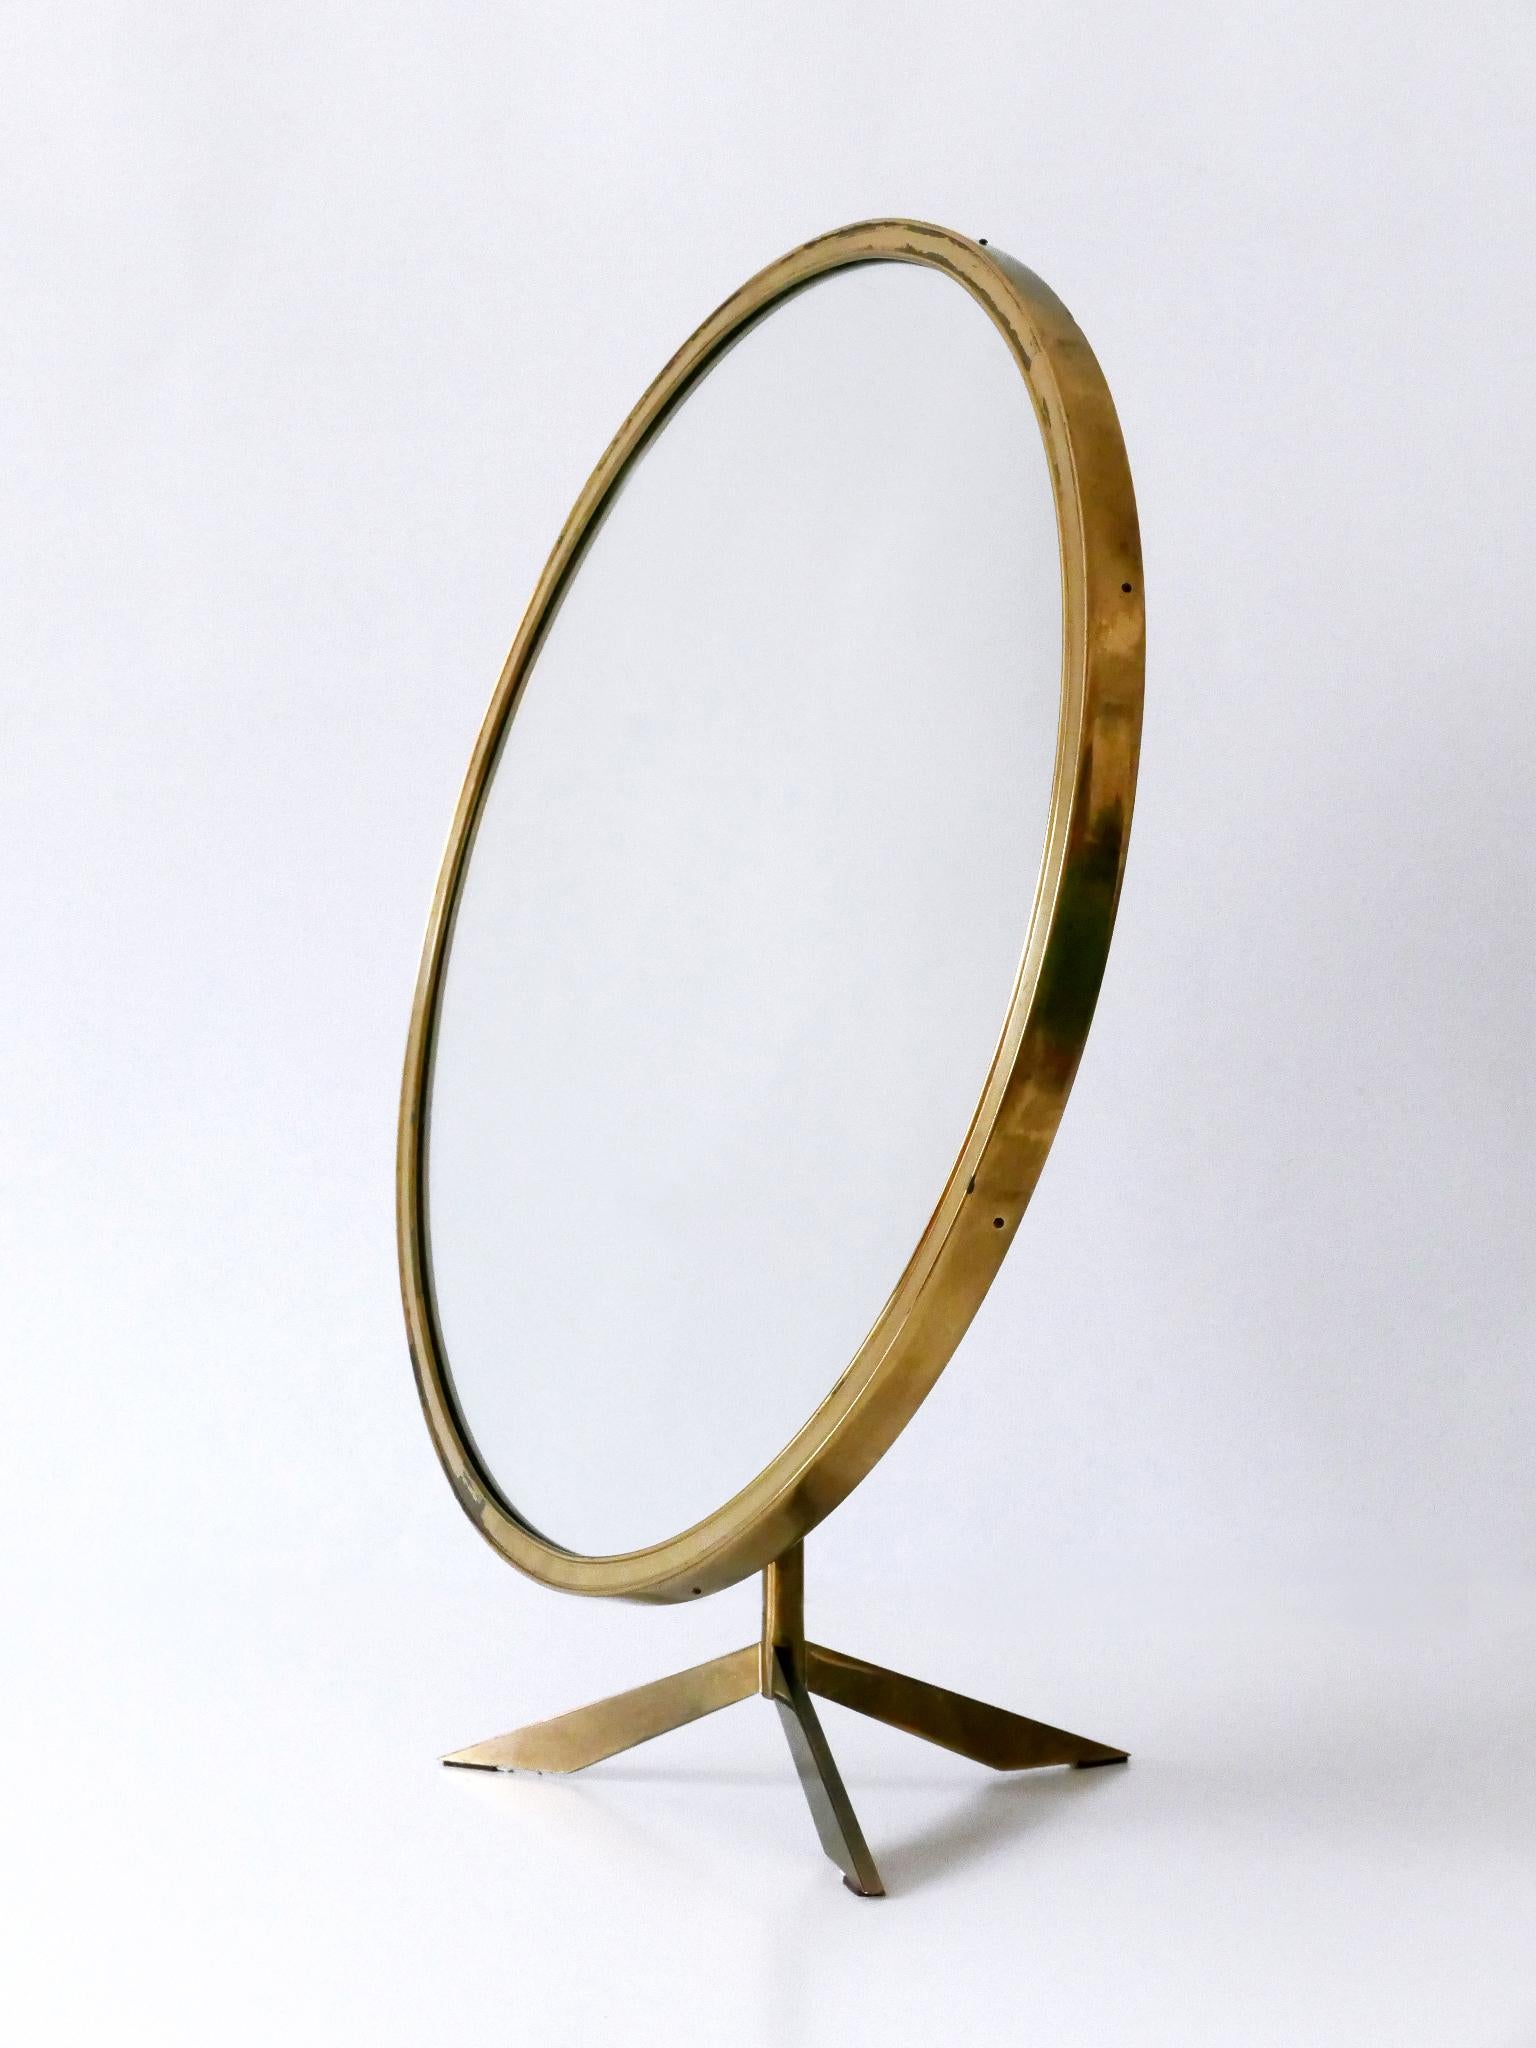 Elegant Mid-Century Modern Wall or Vanity Mirror by Zierform Germany 1950s For Sale 9